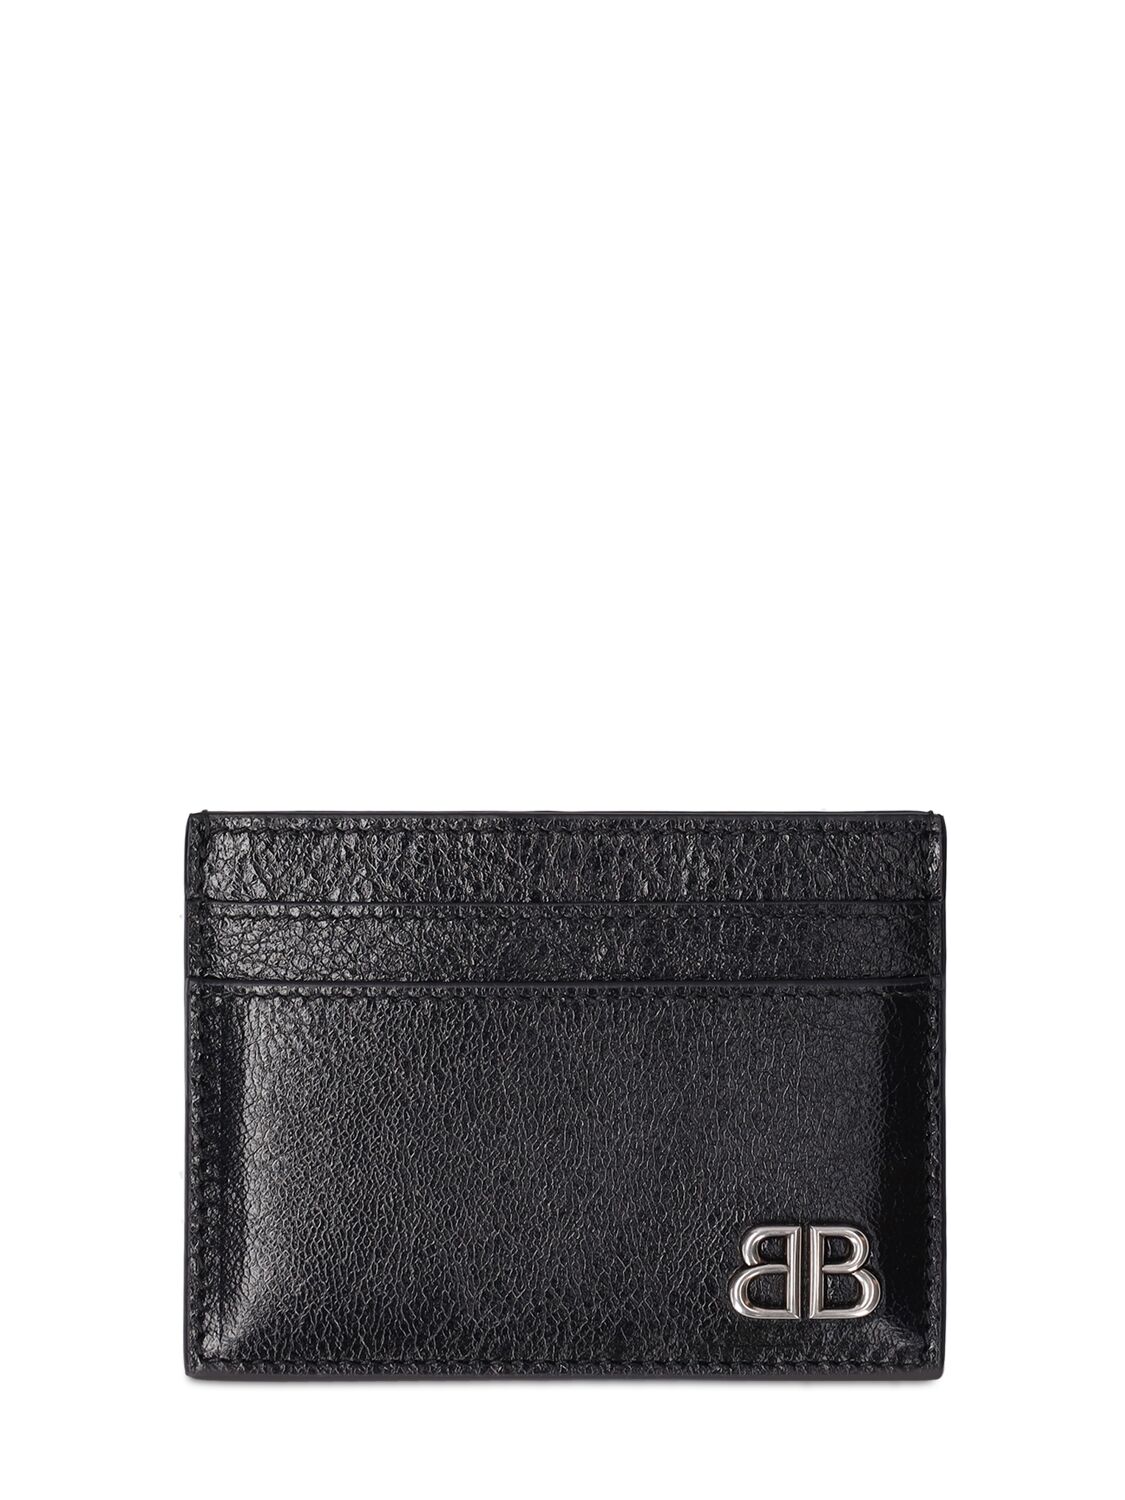 Image of Cagole Leather Card Holder